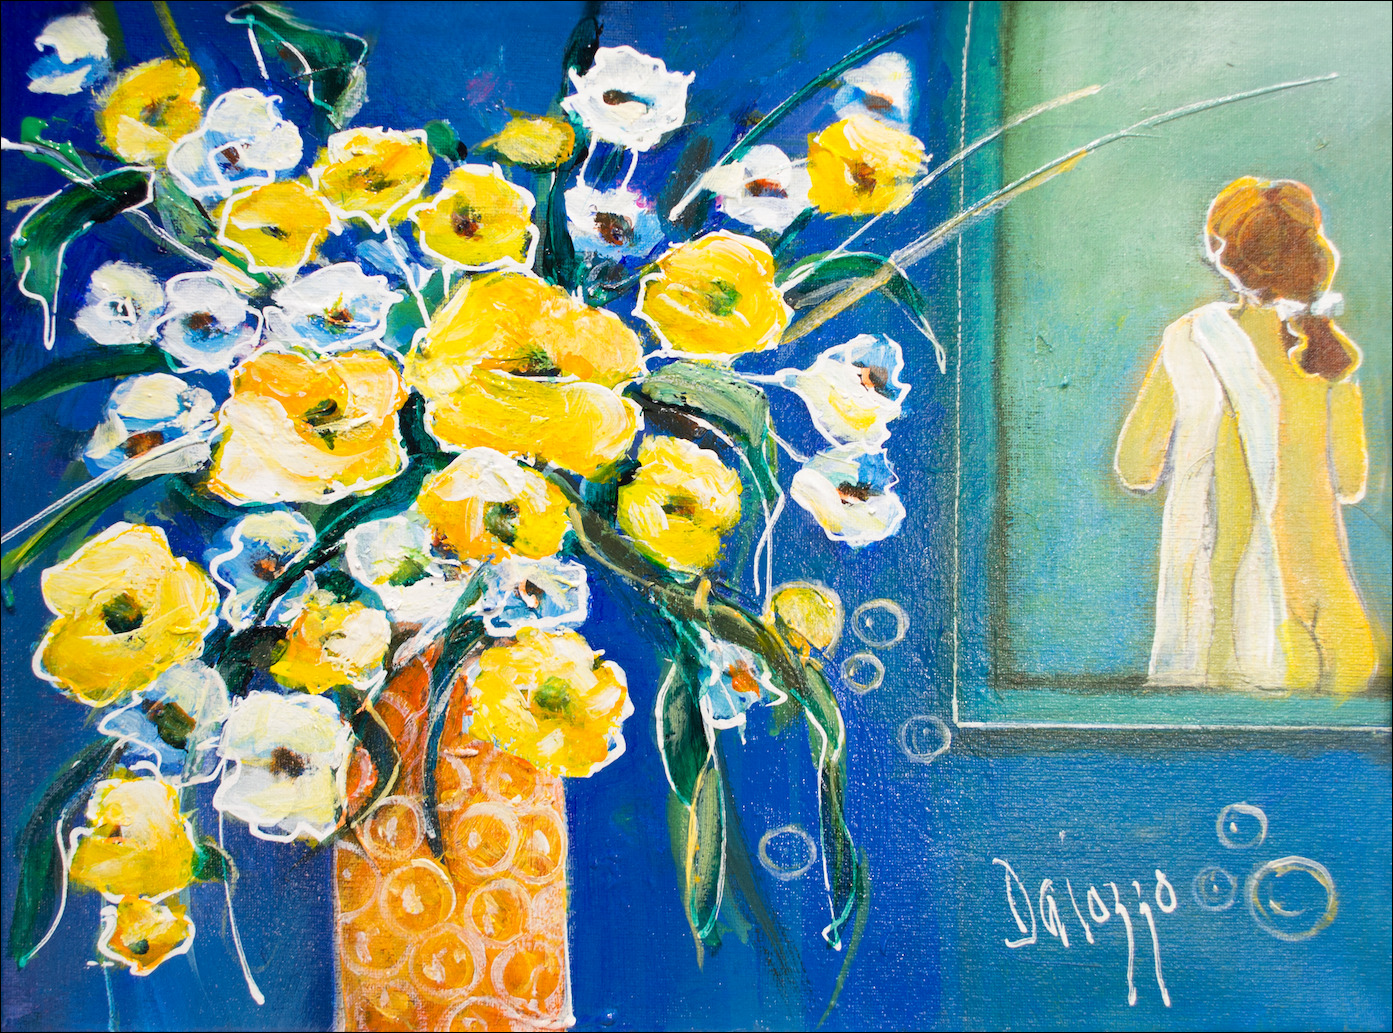 Floral Still Life "A Pop of Yellow" Original Artwork by Lucette Dalozzo